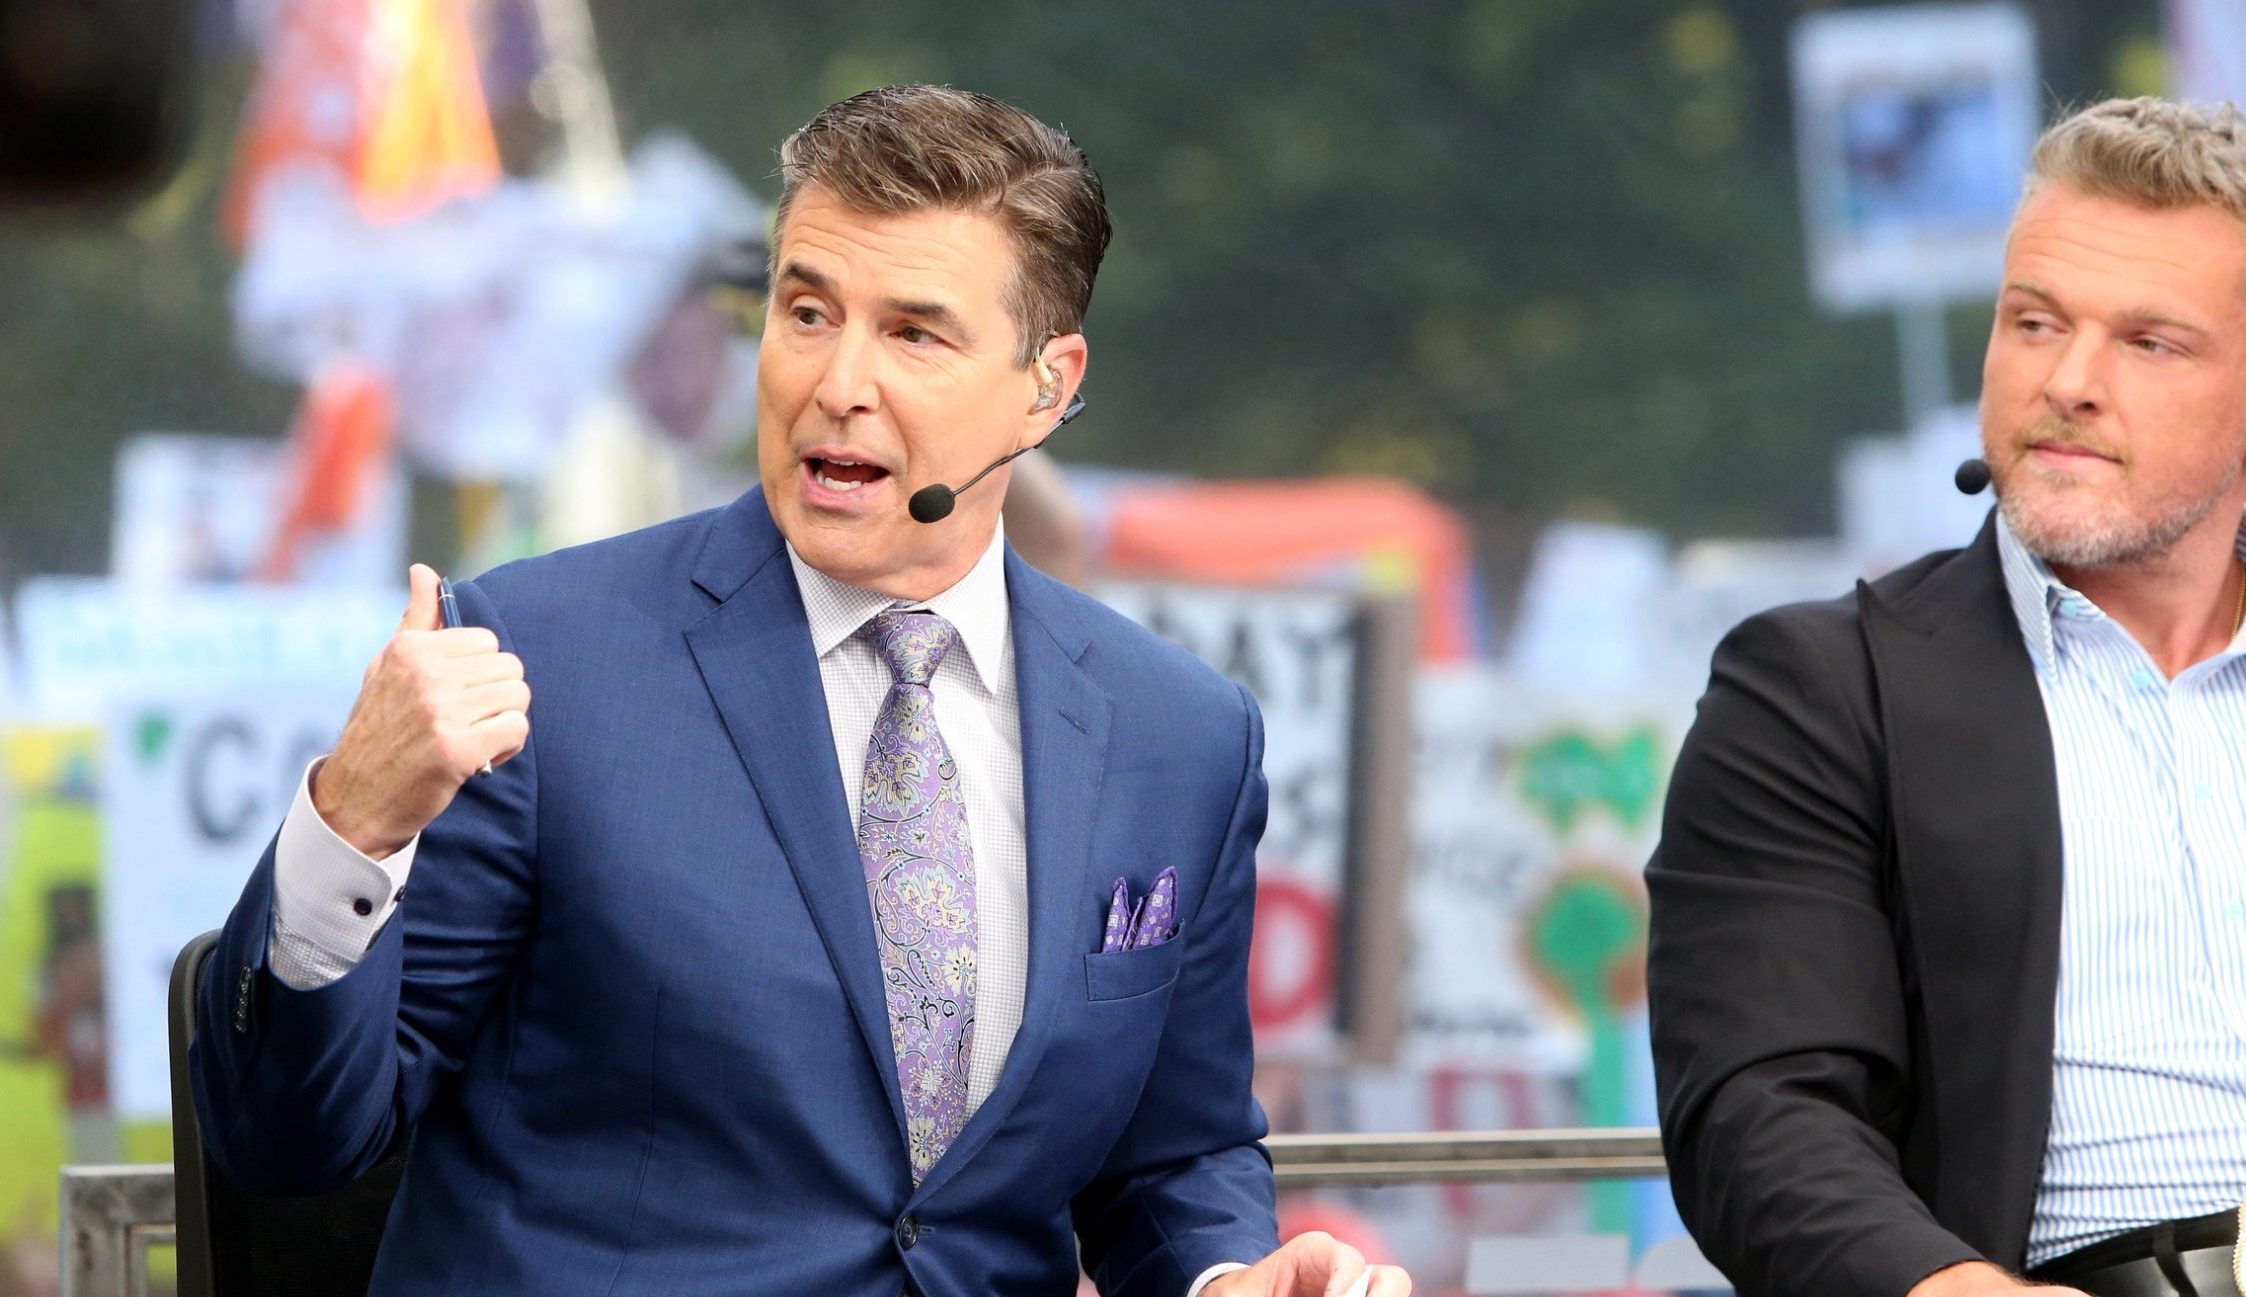 Host Rece Davis speaks with Desmond Howard at left and Pat McAfee at right during the ESPN College GameDay show on Saturday, Sept. 23, 2023, on the Hesburgh Library lawn on the University of Notre Dame campus in South Bend. The show was to highlight the Notre Dame-Ohio State game.